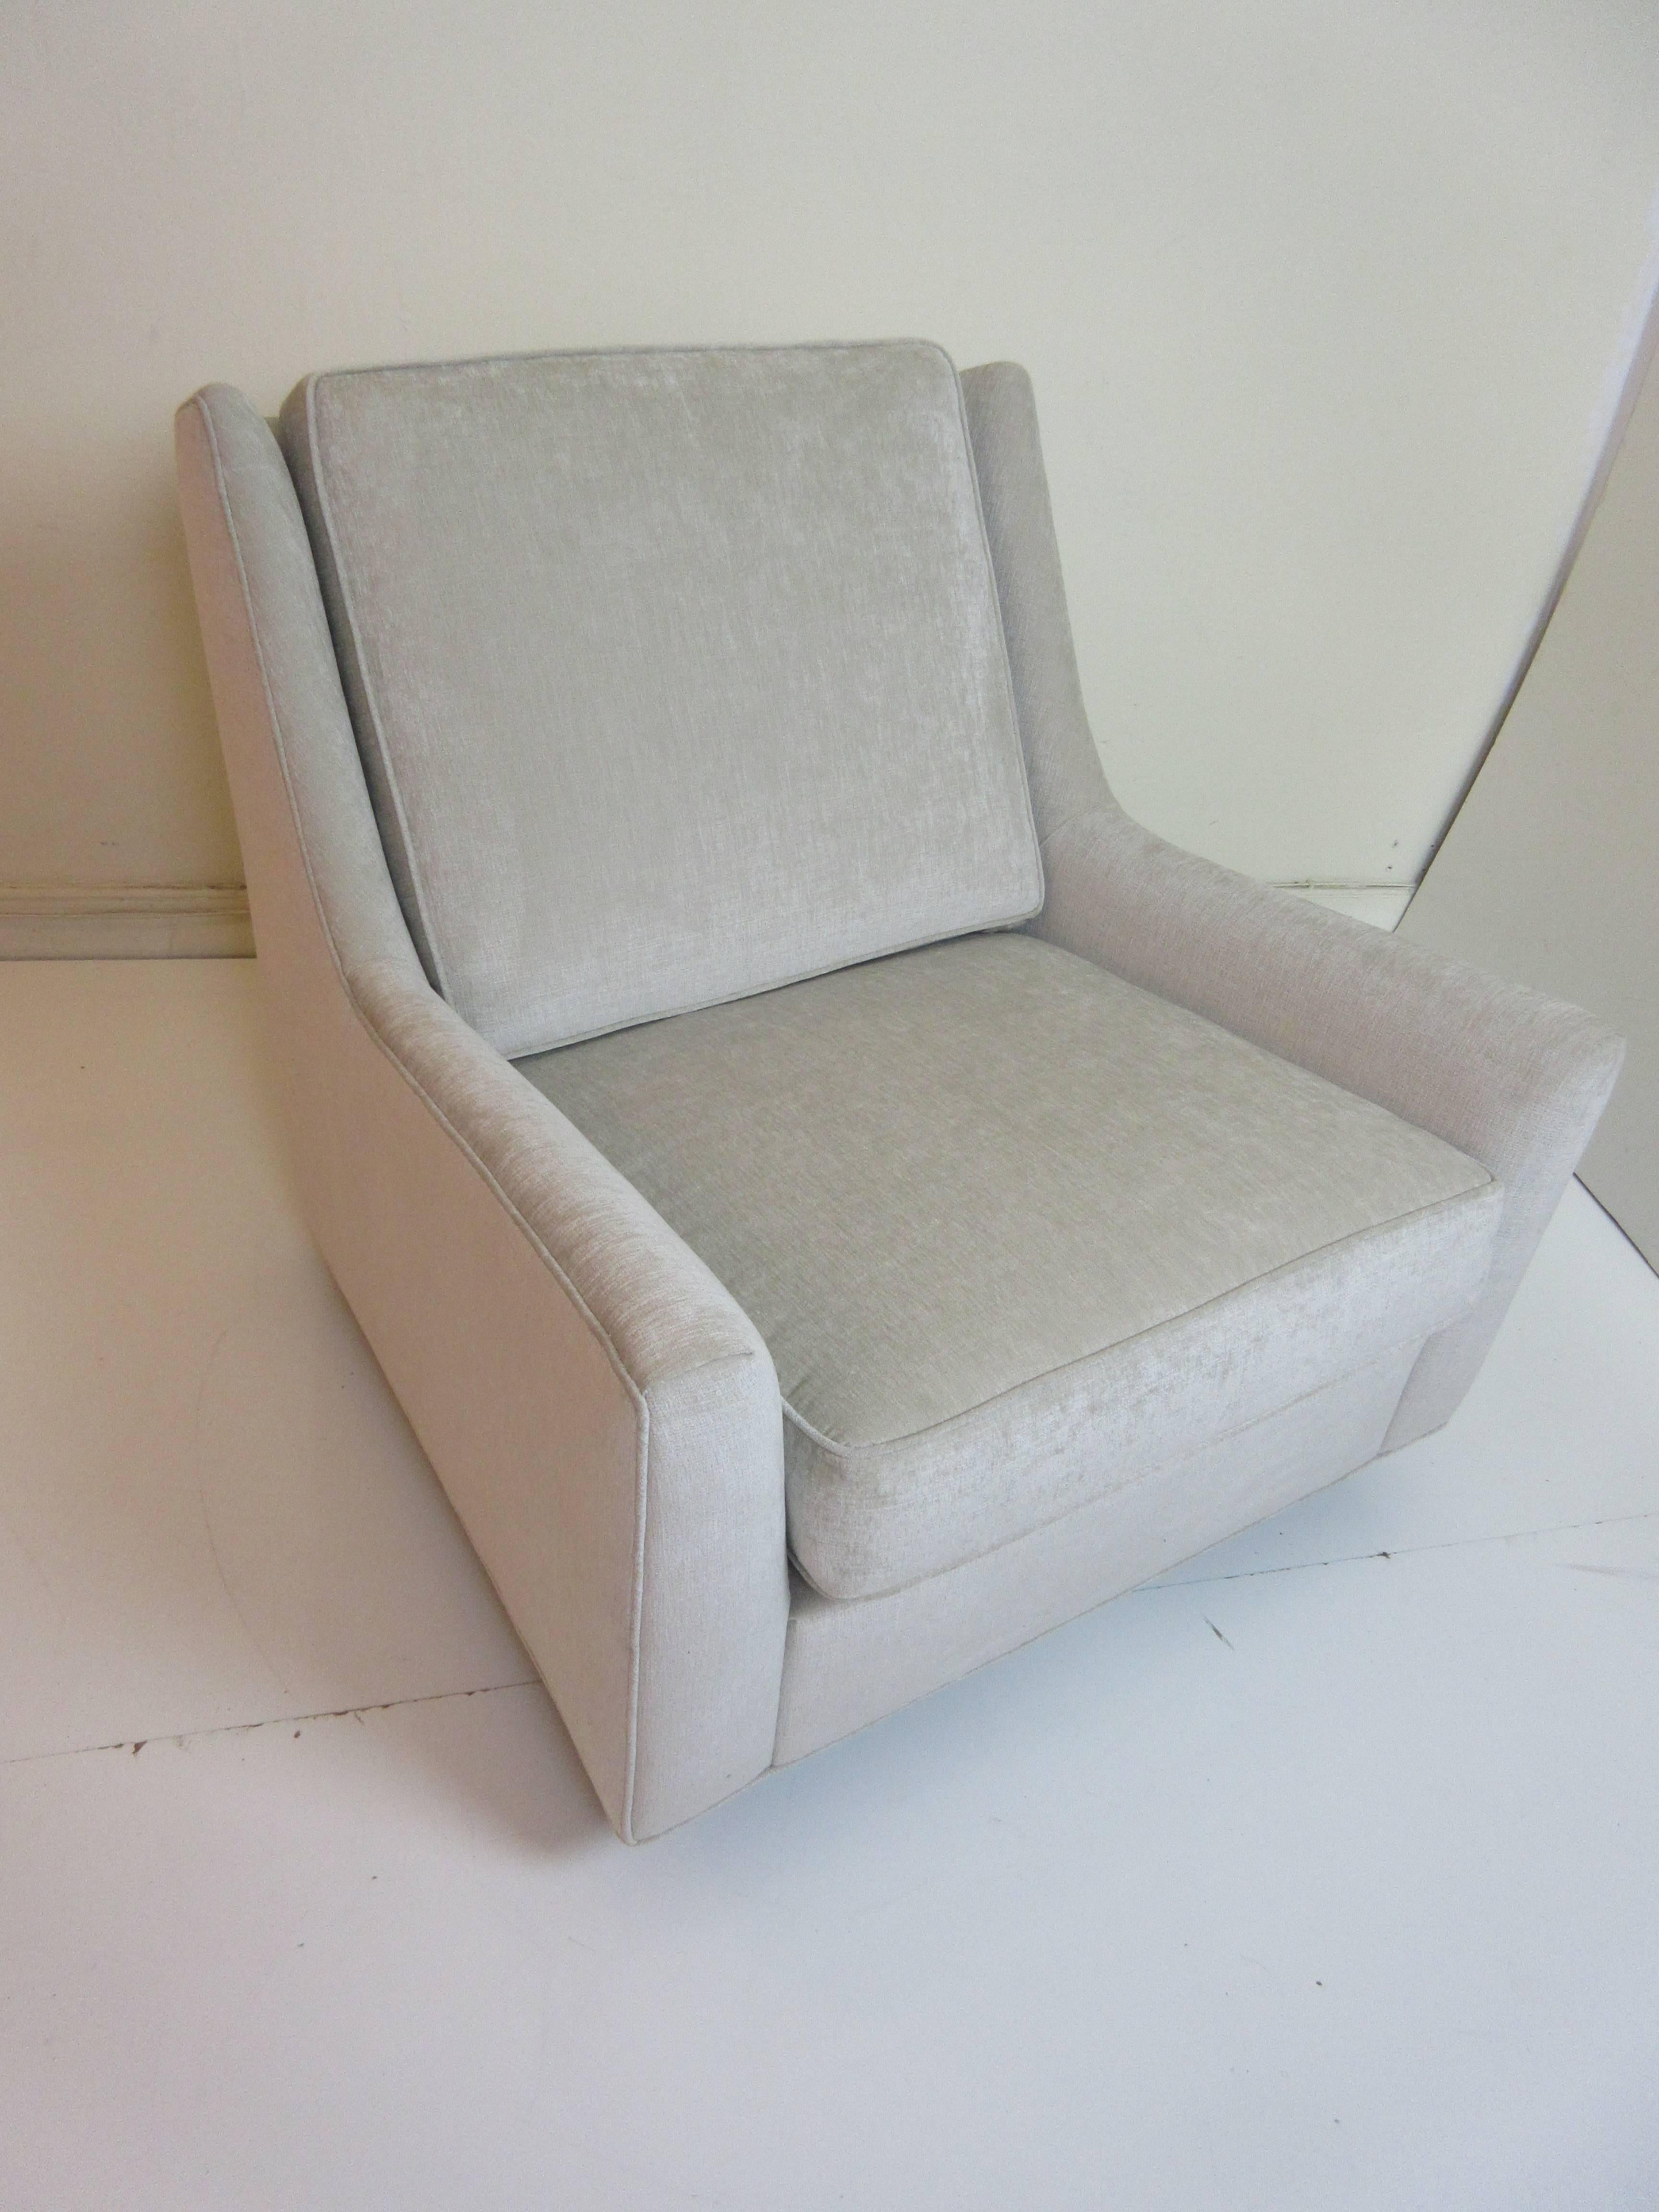 Floating Oversized Milo Baughman Lounge Chair In Excellent Condition In Philadelphia, PA